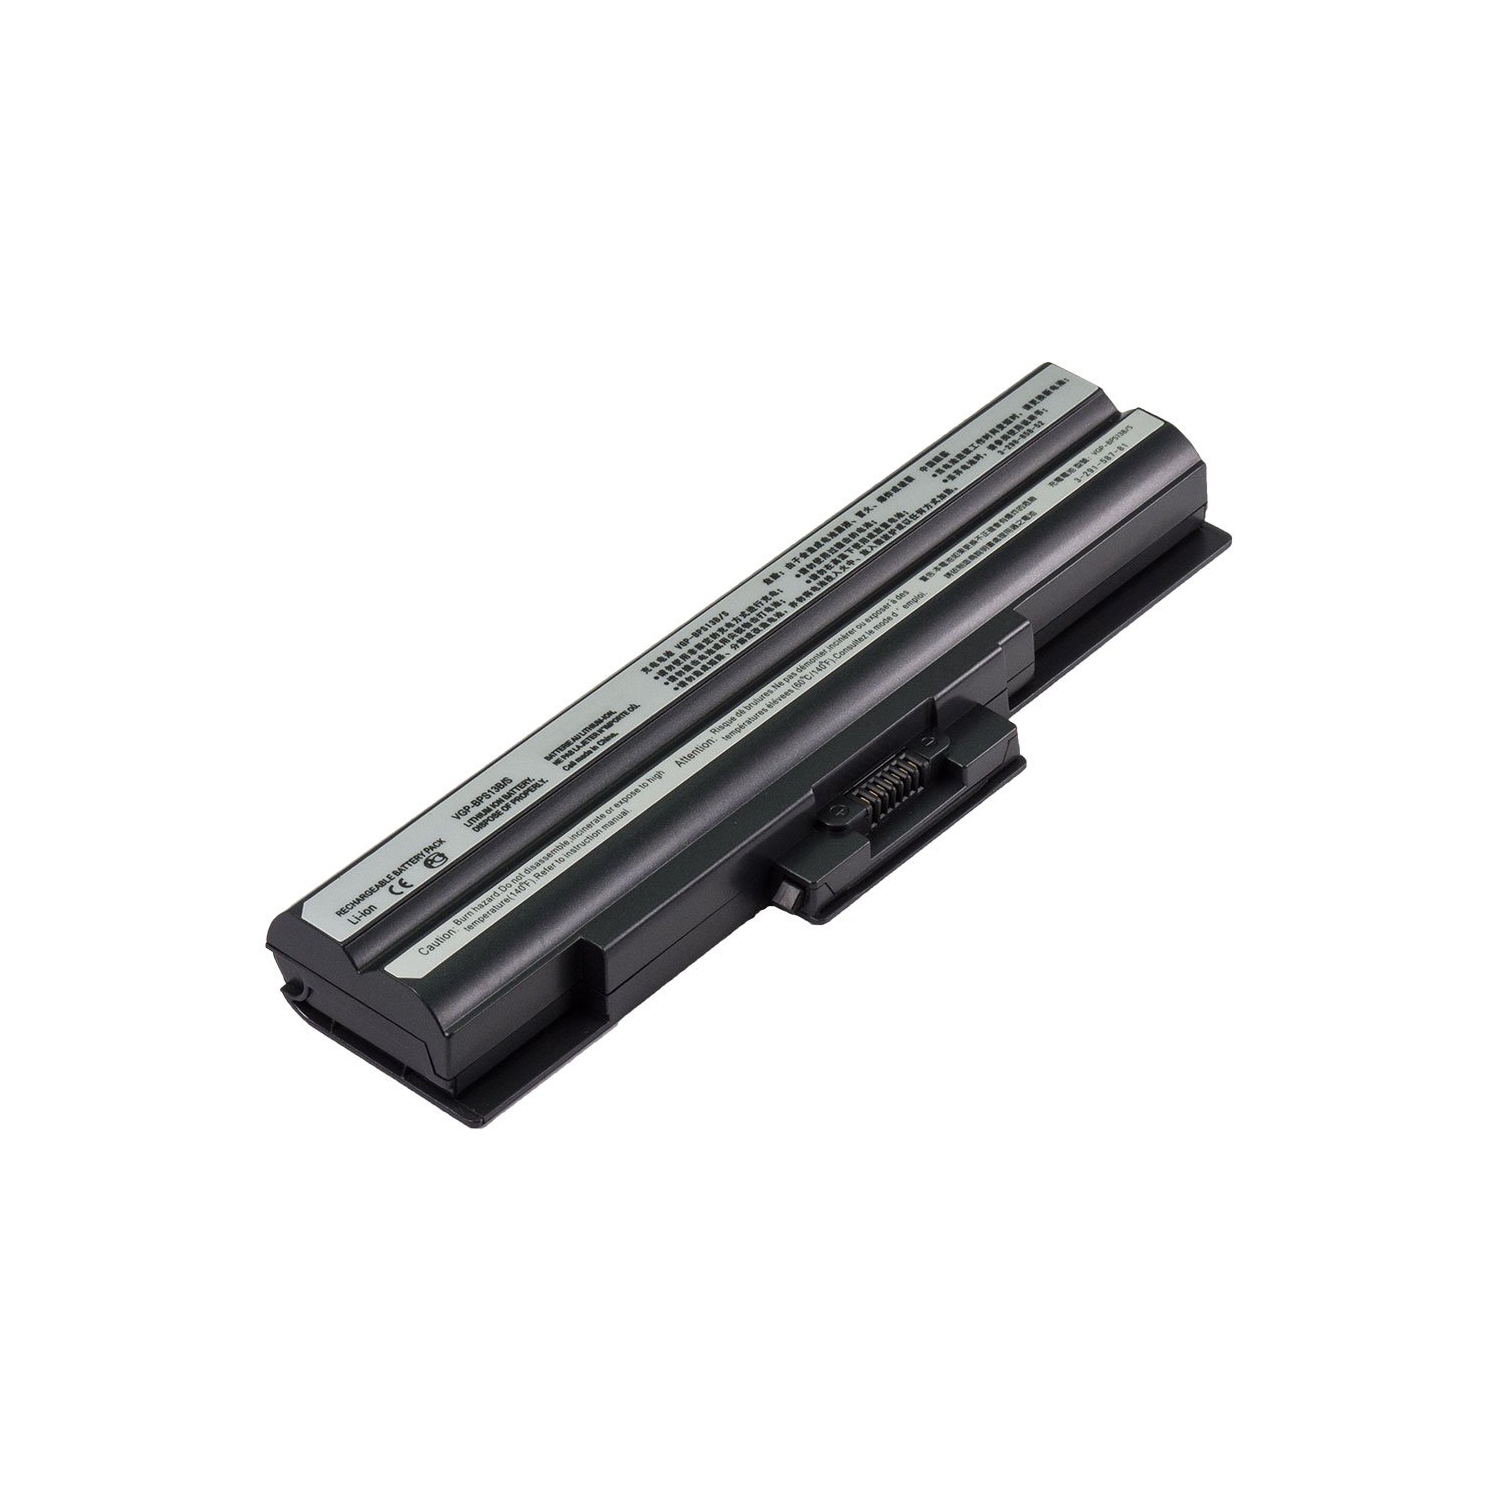 Laptop Battery Replacement for Sony VAIO VGN-AW19, VGP-BPS13, VGP-BPS13/S, VGP-BPS13A/Q, VGP-BPS13B/B, VGP-BSP13/S